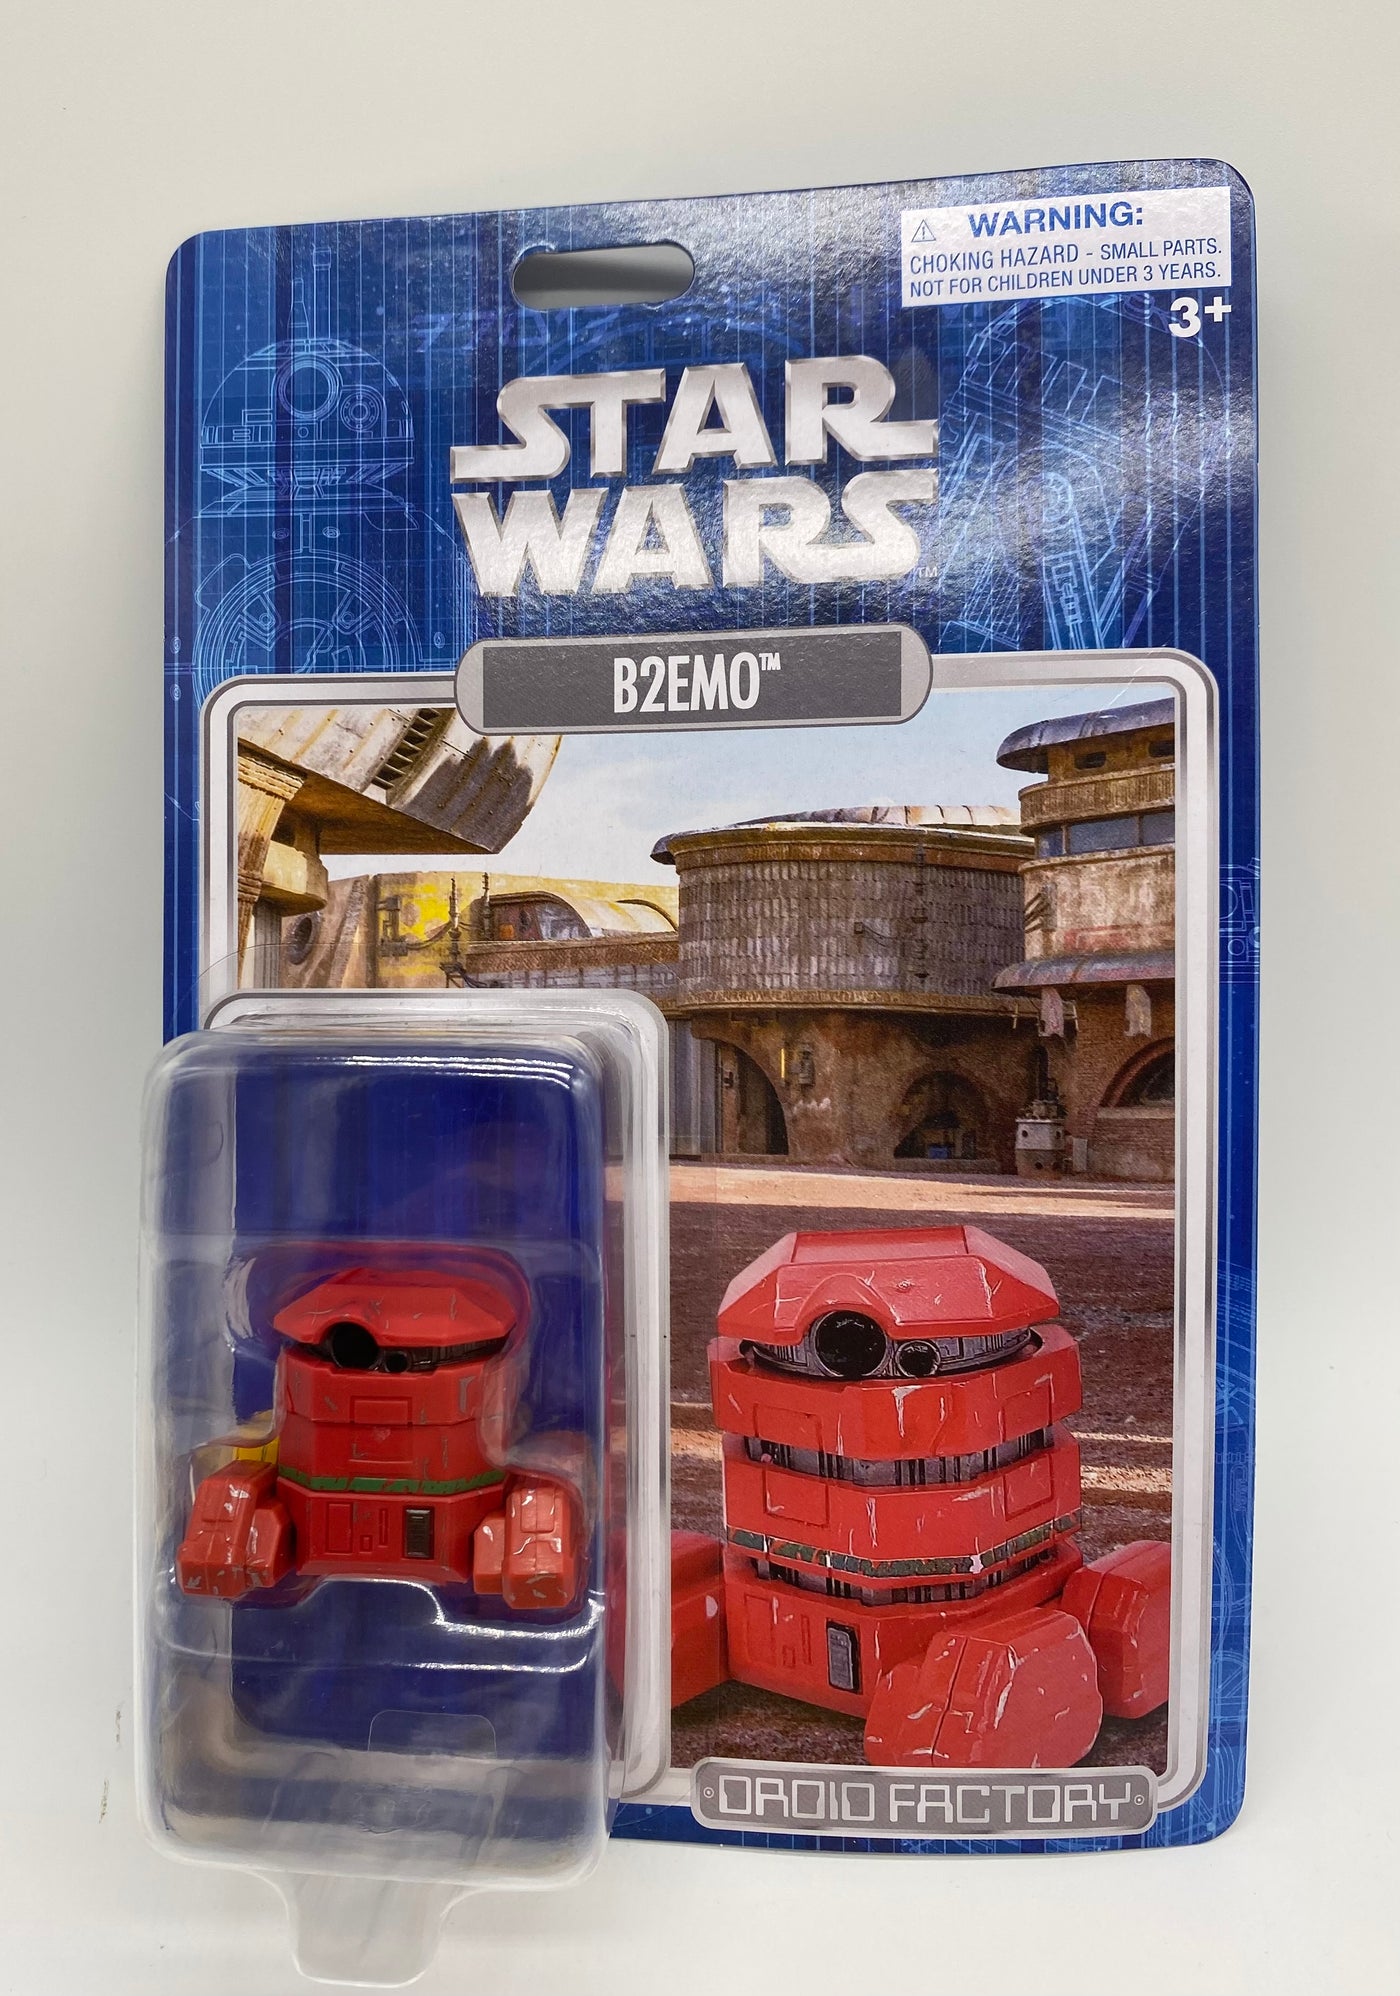 Disney Parks Star Wars B2EMO Droid Factory Figure New with Box